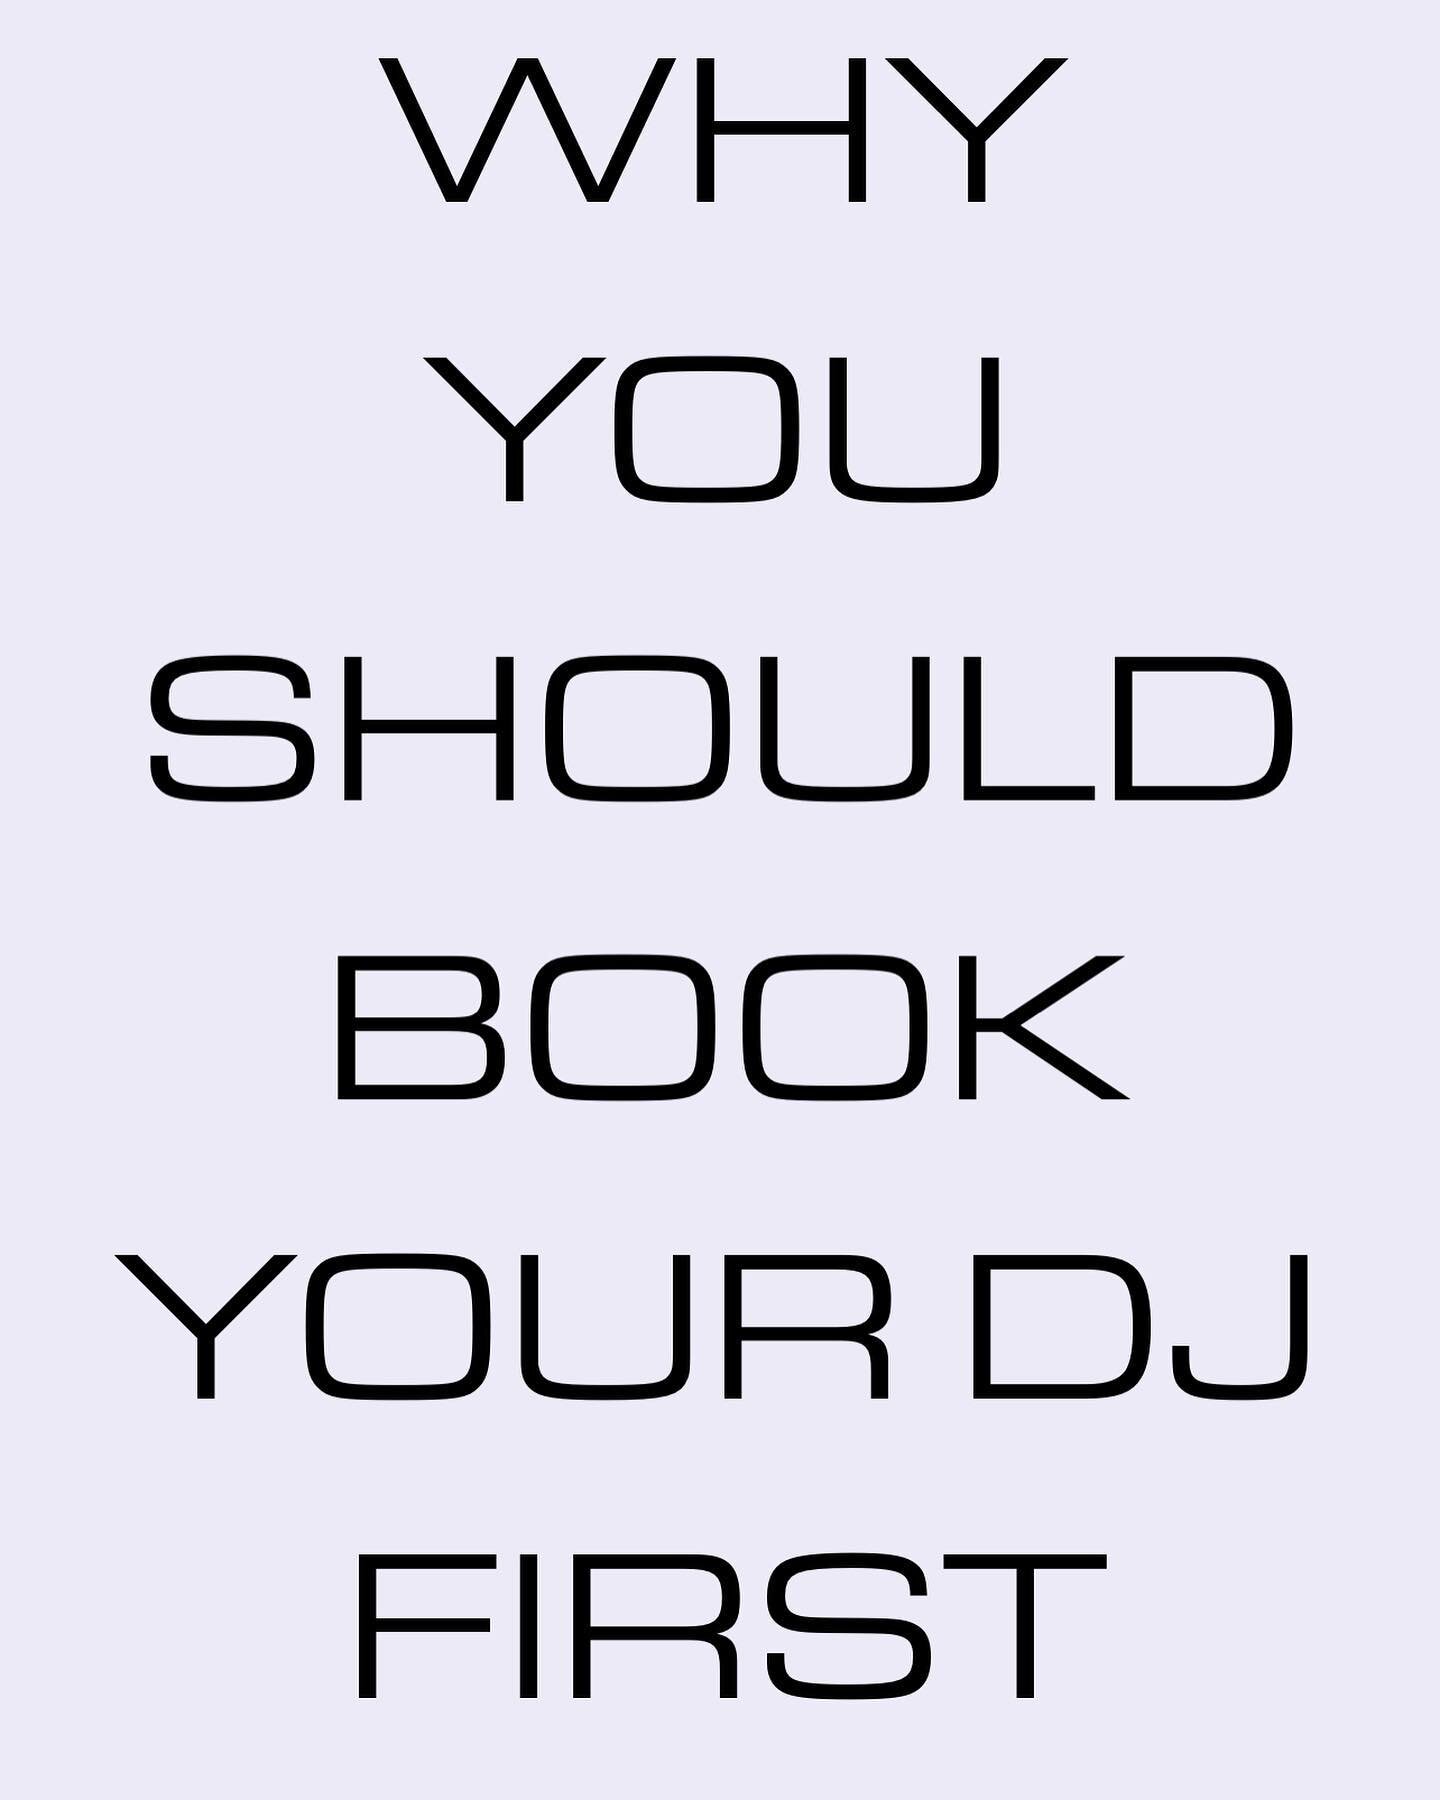 INTRODUCING OUR NEW BLOG! Link in Bio!

Check out our first blog titled &ldquo;Why You Should Book Your DJ First&rdquo;. Are you in the process of planning a special event? Whether it's a wedding, birthday, or corporate gathering, one thing that you 